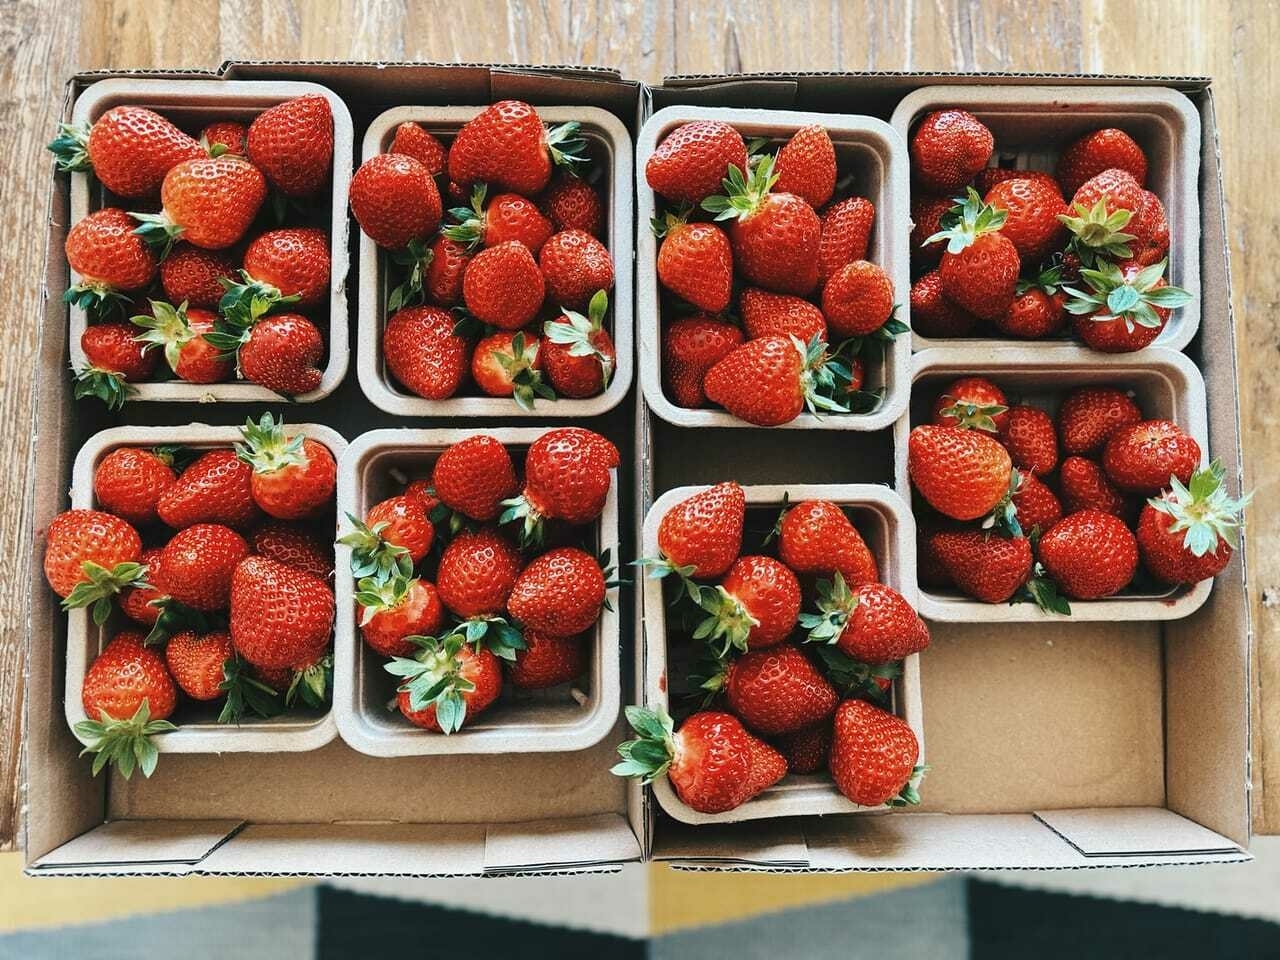 Eight cartons of fresh, yummy looking, strawberries in a cardboard box.